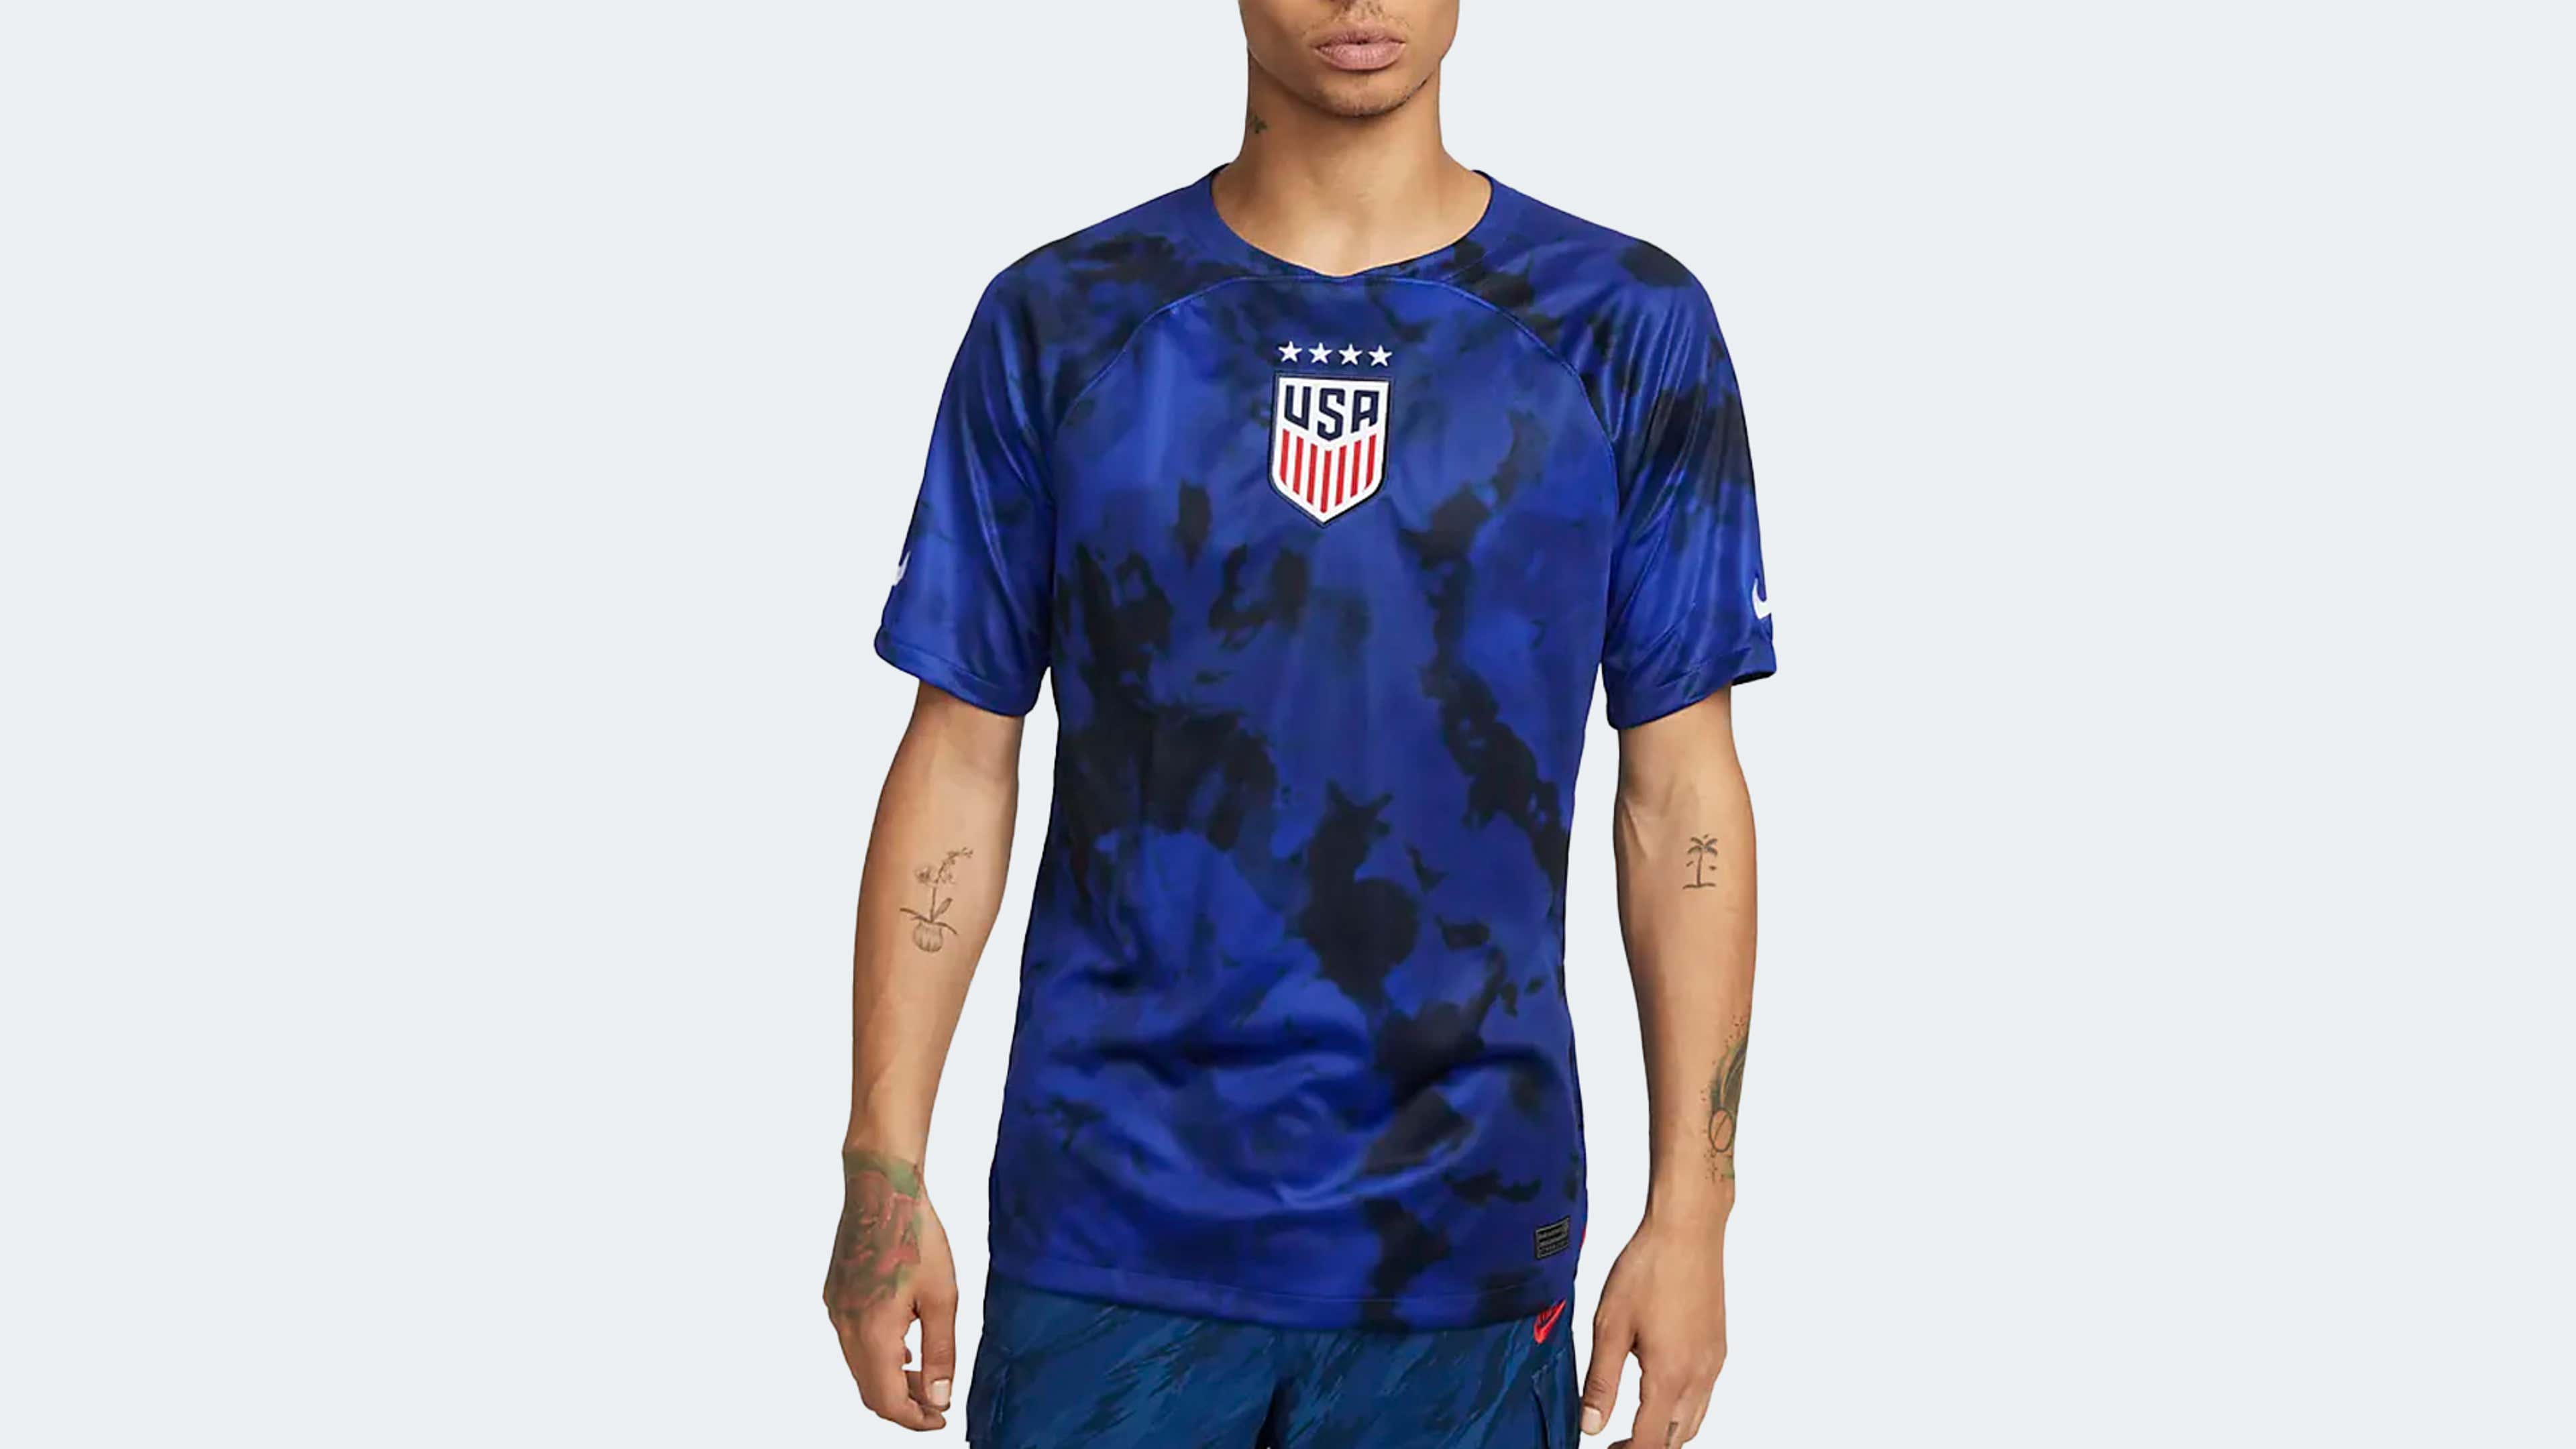 Show Your Pride With World Cup 2022 Jerseys